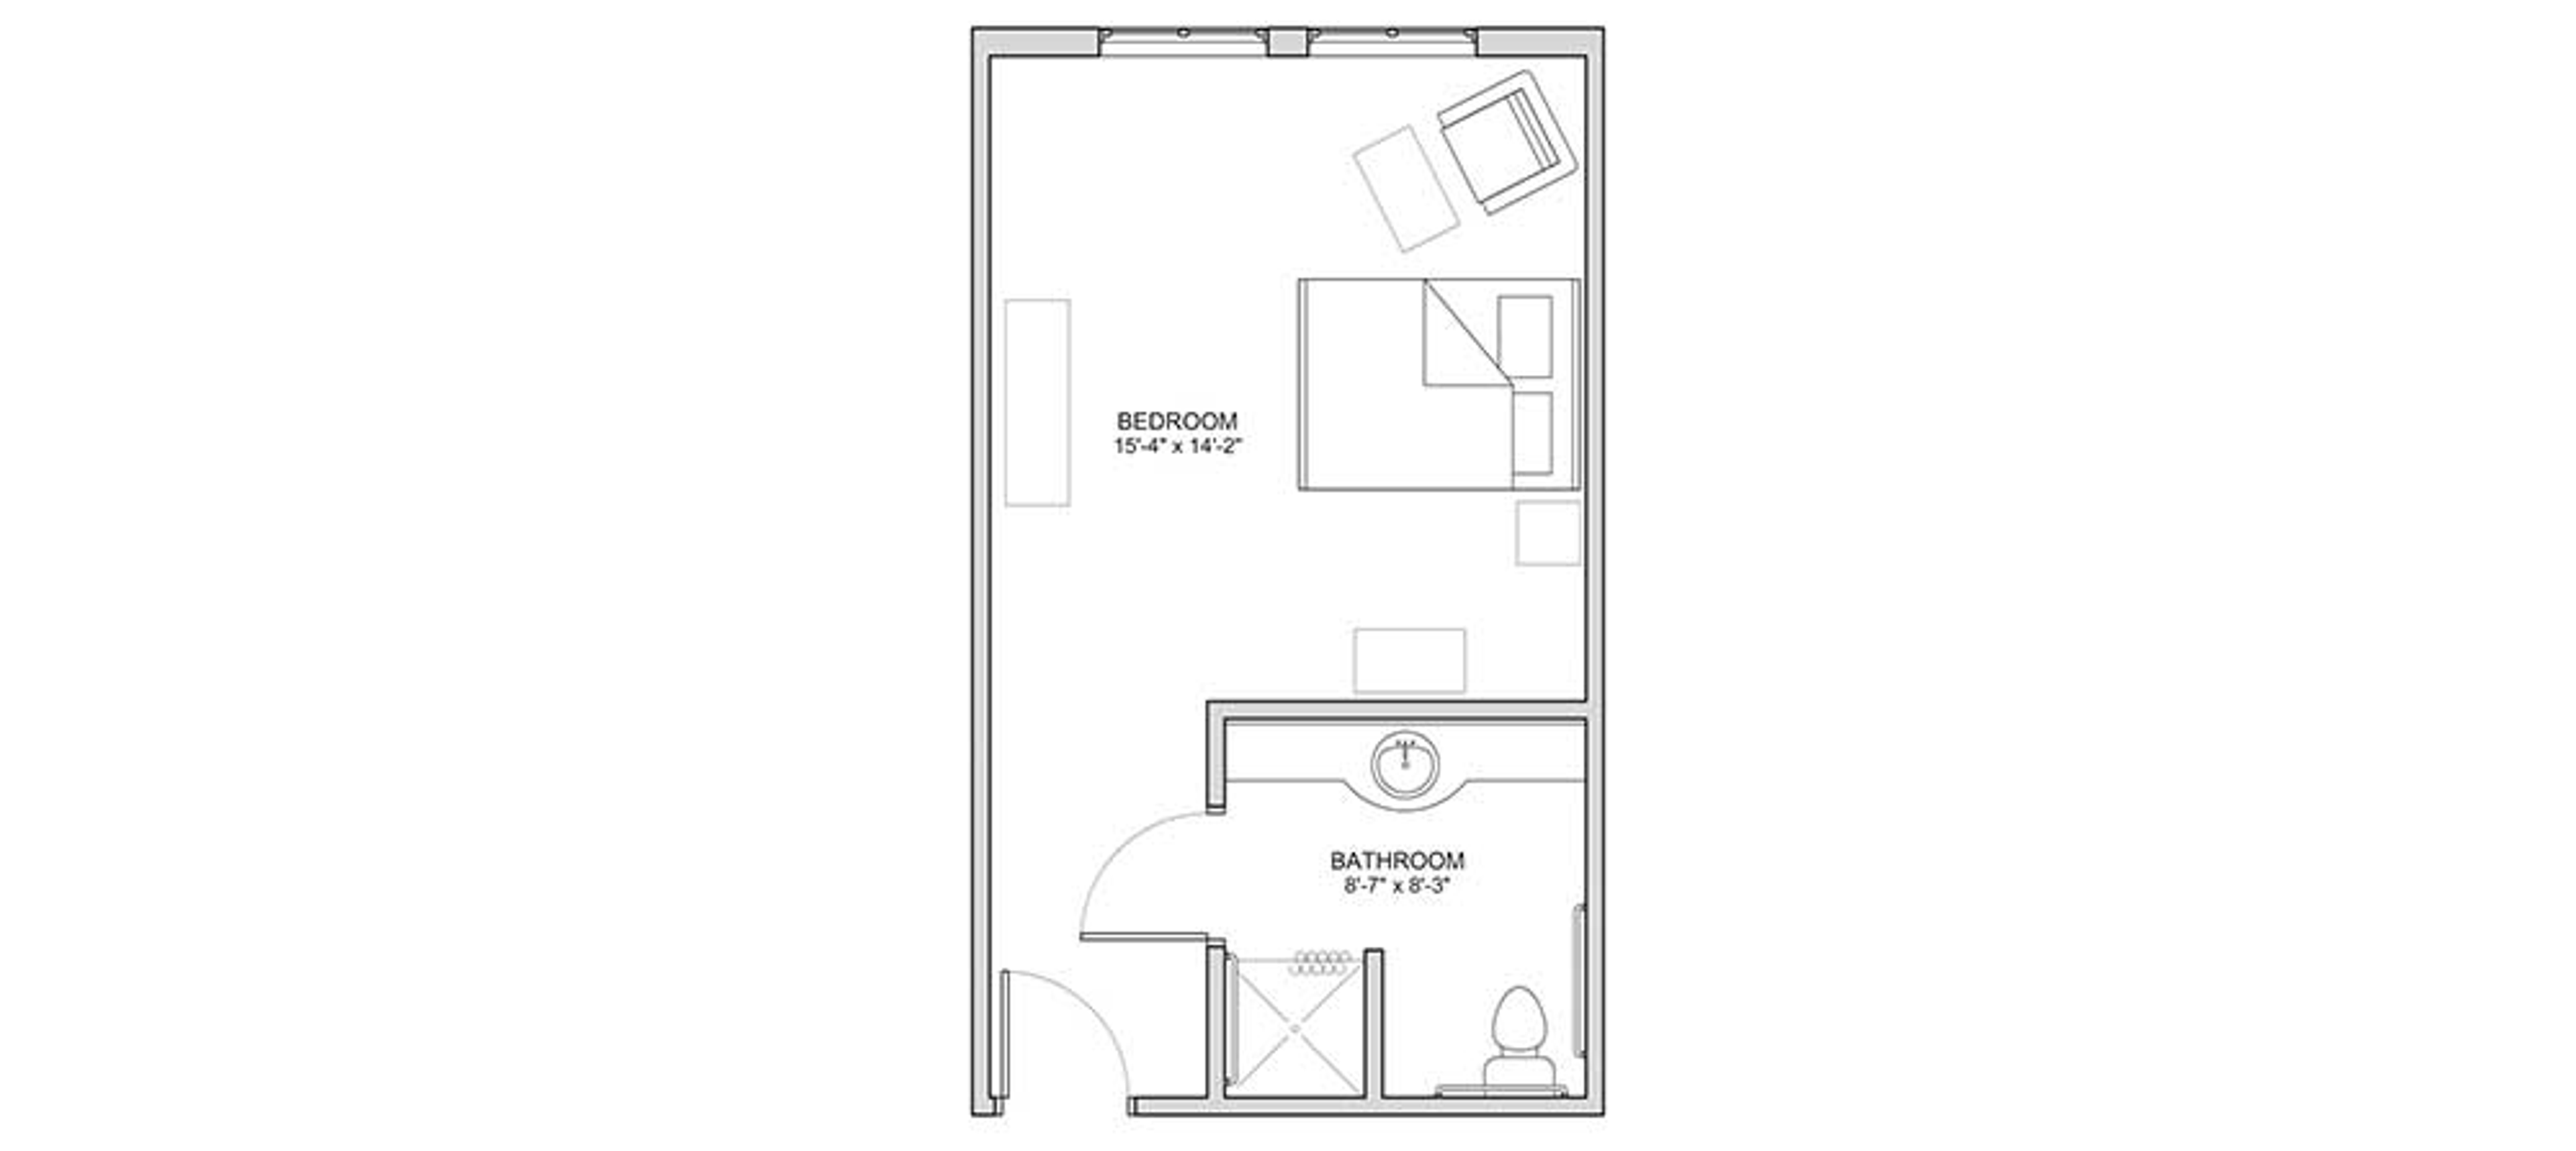 Floorplan - The Auberge at The Woodlands - Studio, Private Memory Care